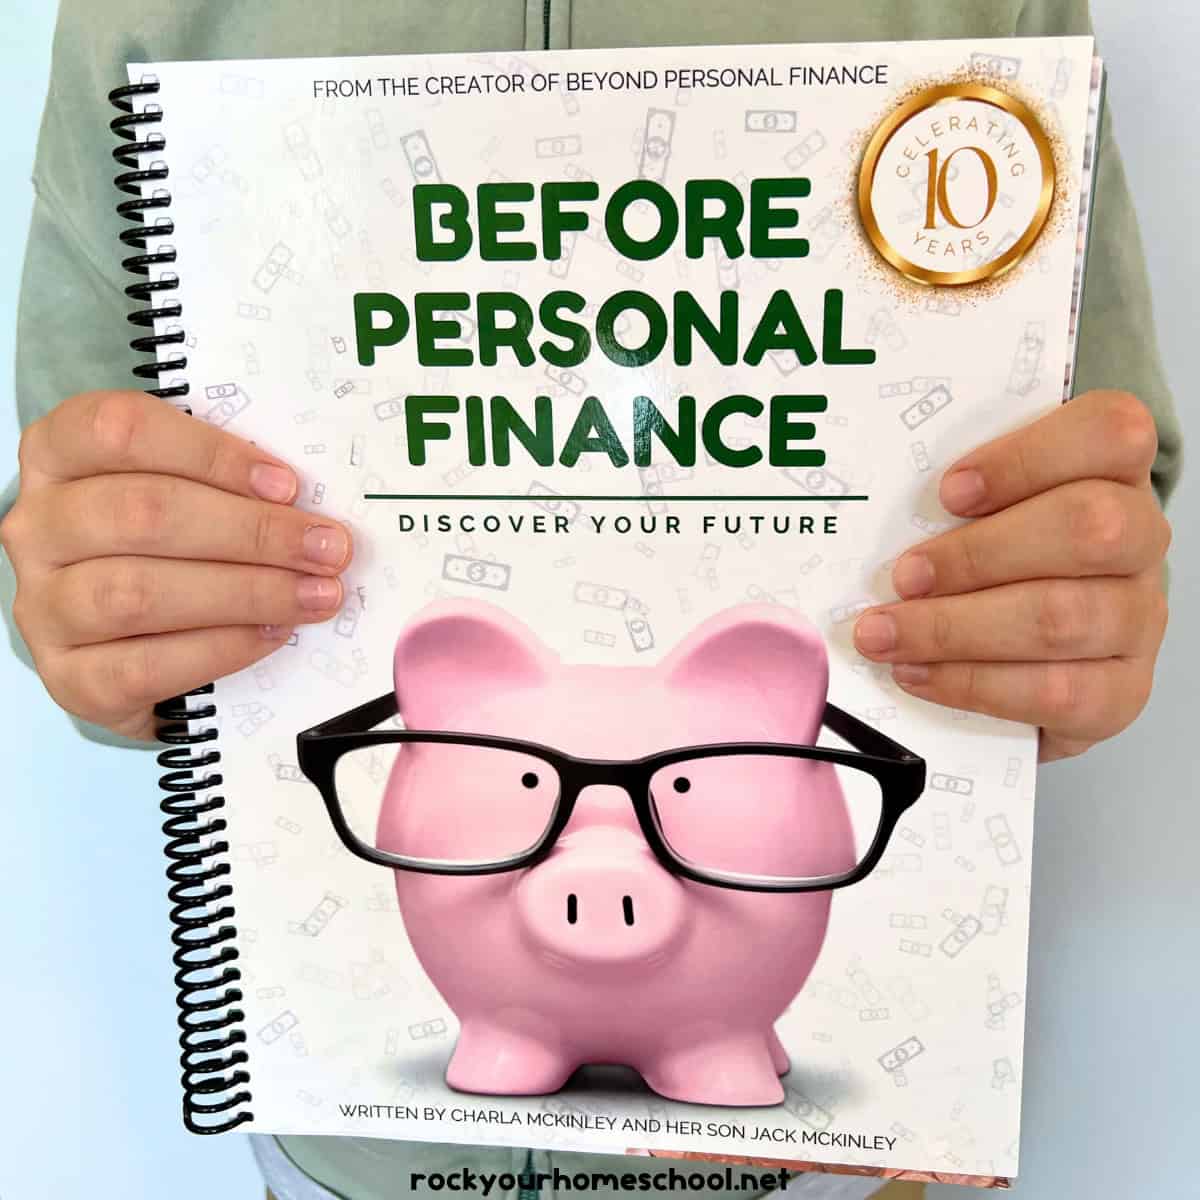 Beyond Personal Finance: Money And Life Skills For Tweens (Review)